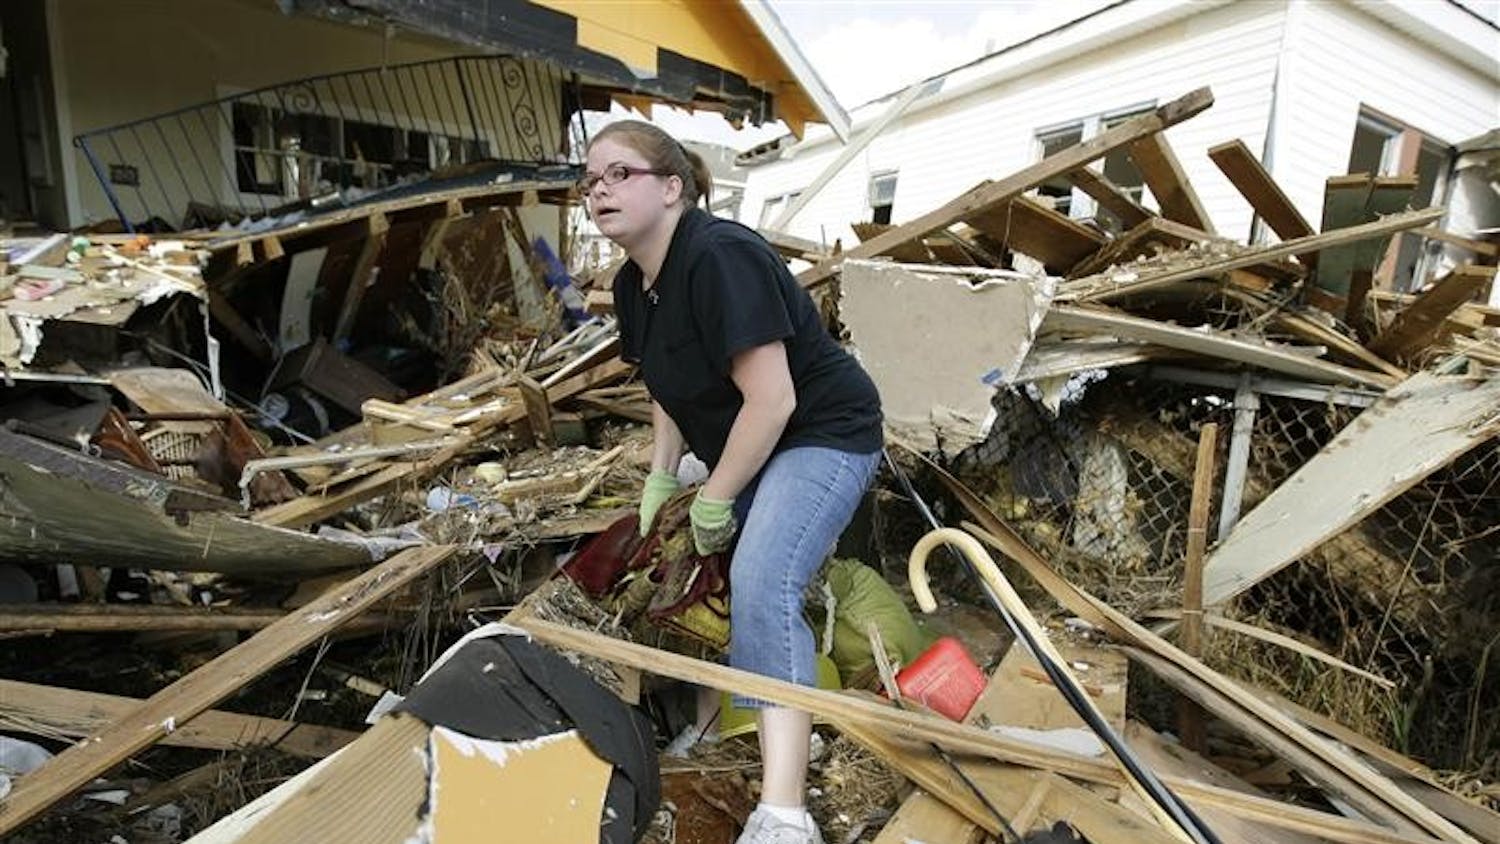 Gina Hadley sifts through her destroyed home in the aftermath of Hurricane Ike on Wednesday in Galveston, Texas. Residents were allowed to return to the island Wednesday.